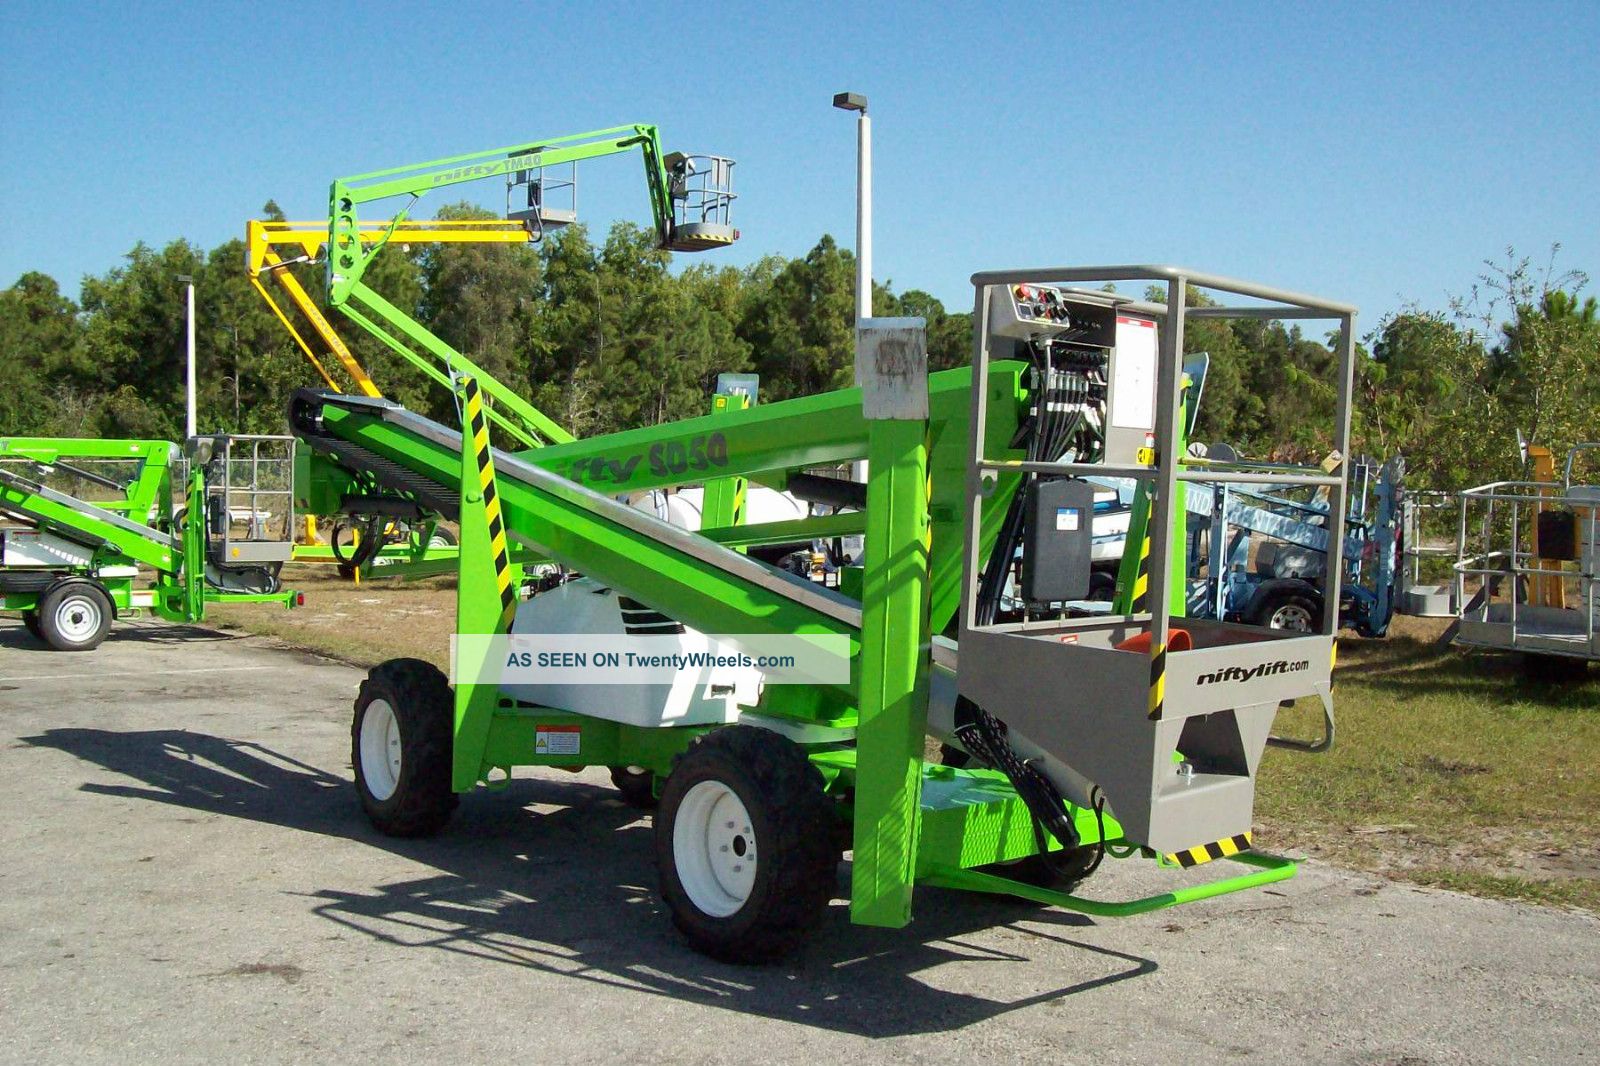 Nifty Sd50 56 ' Boom Lift,  4 Wheel Drive,  Diesel,  Only Weighs 6000 Lbs, Lifts photo